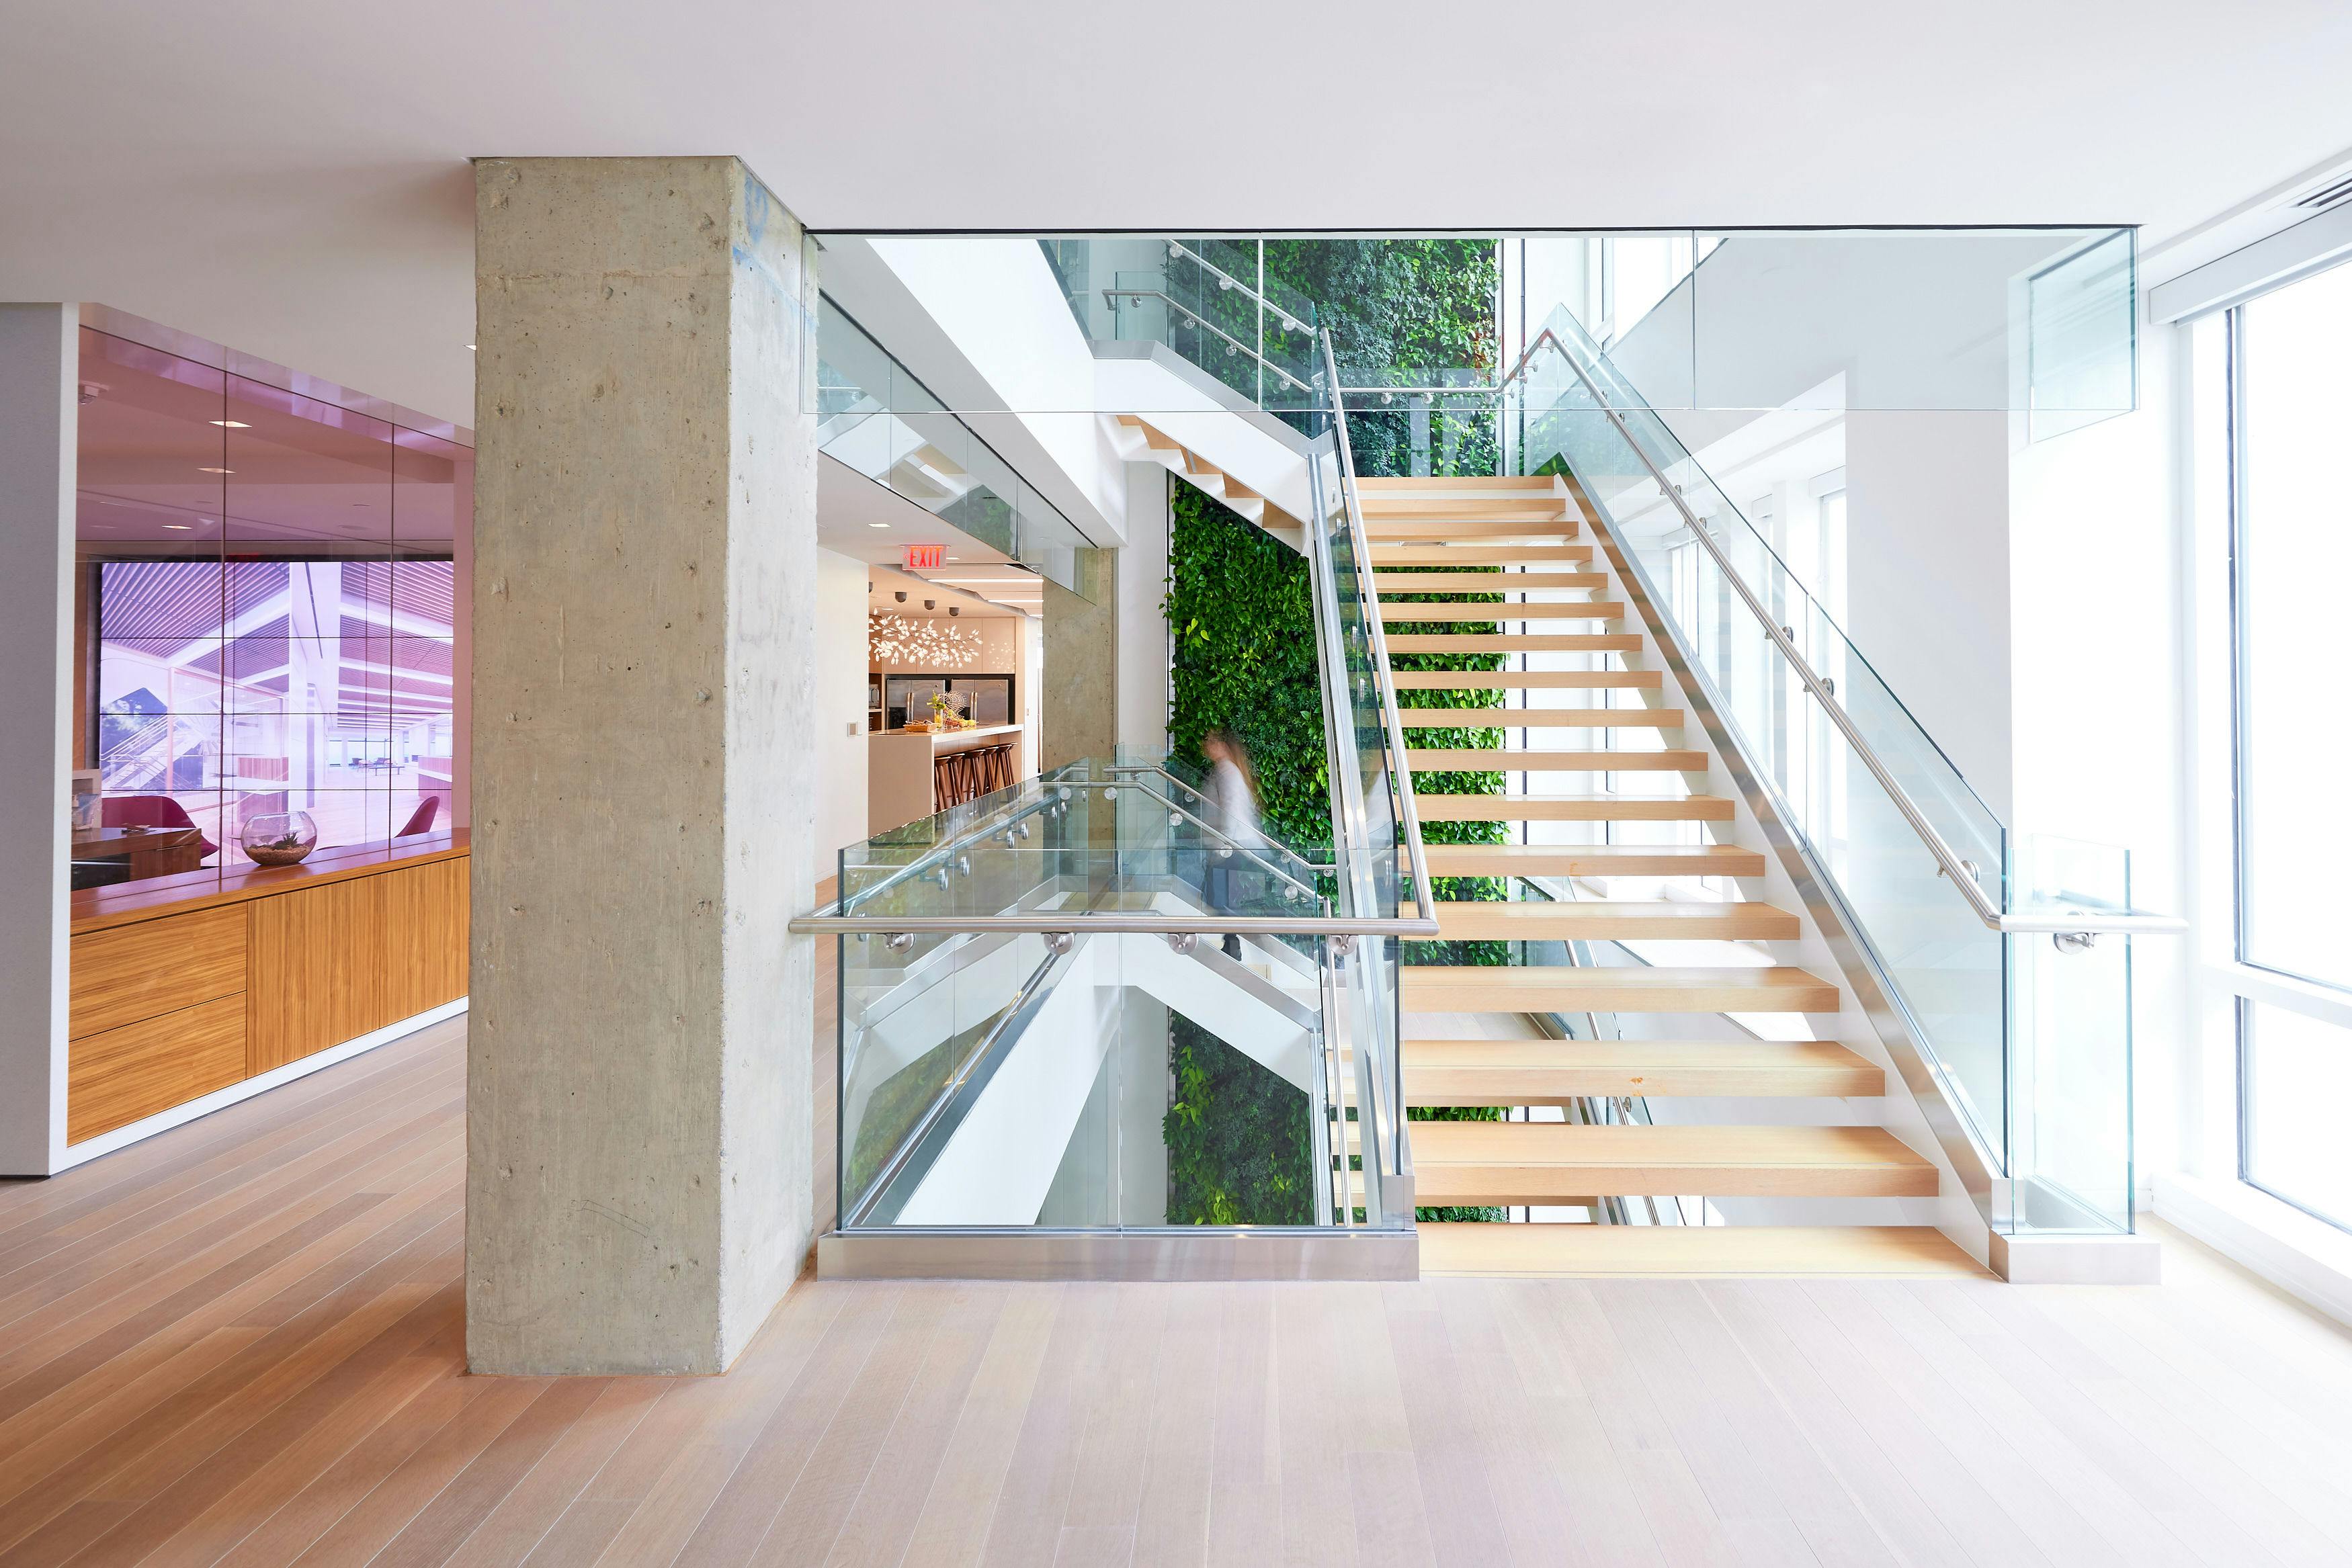 A flight of stairs in Nixon Peabody's DC office; behind the stairs, stretching out of view above and below the staircase, can be seen a green 'living wall' covered with living plants